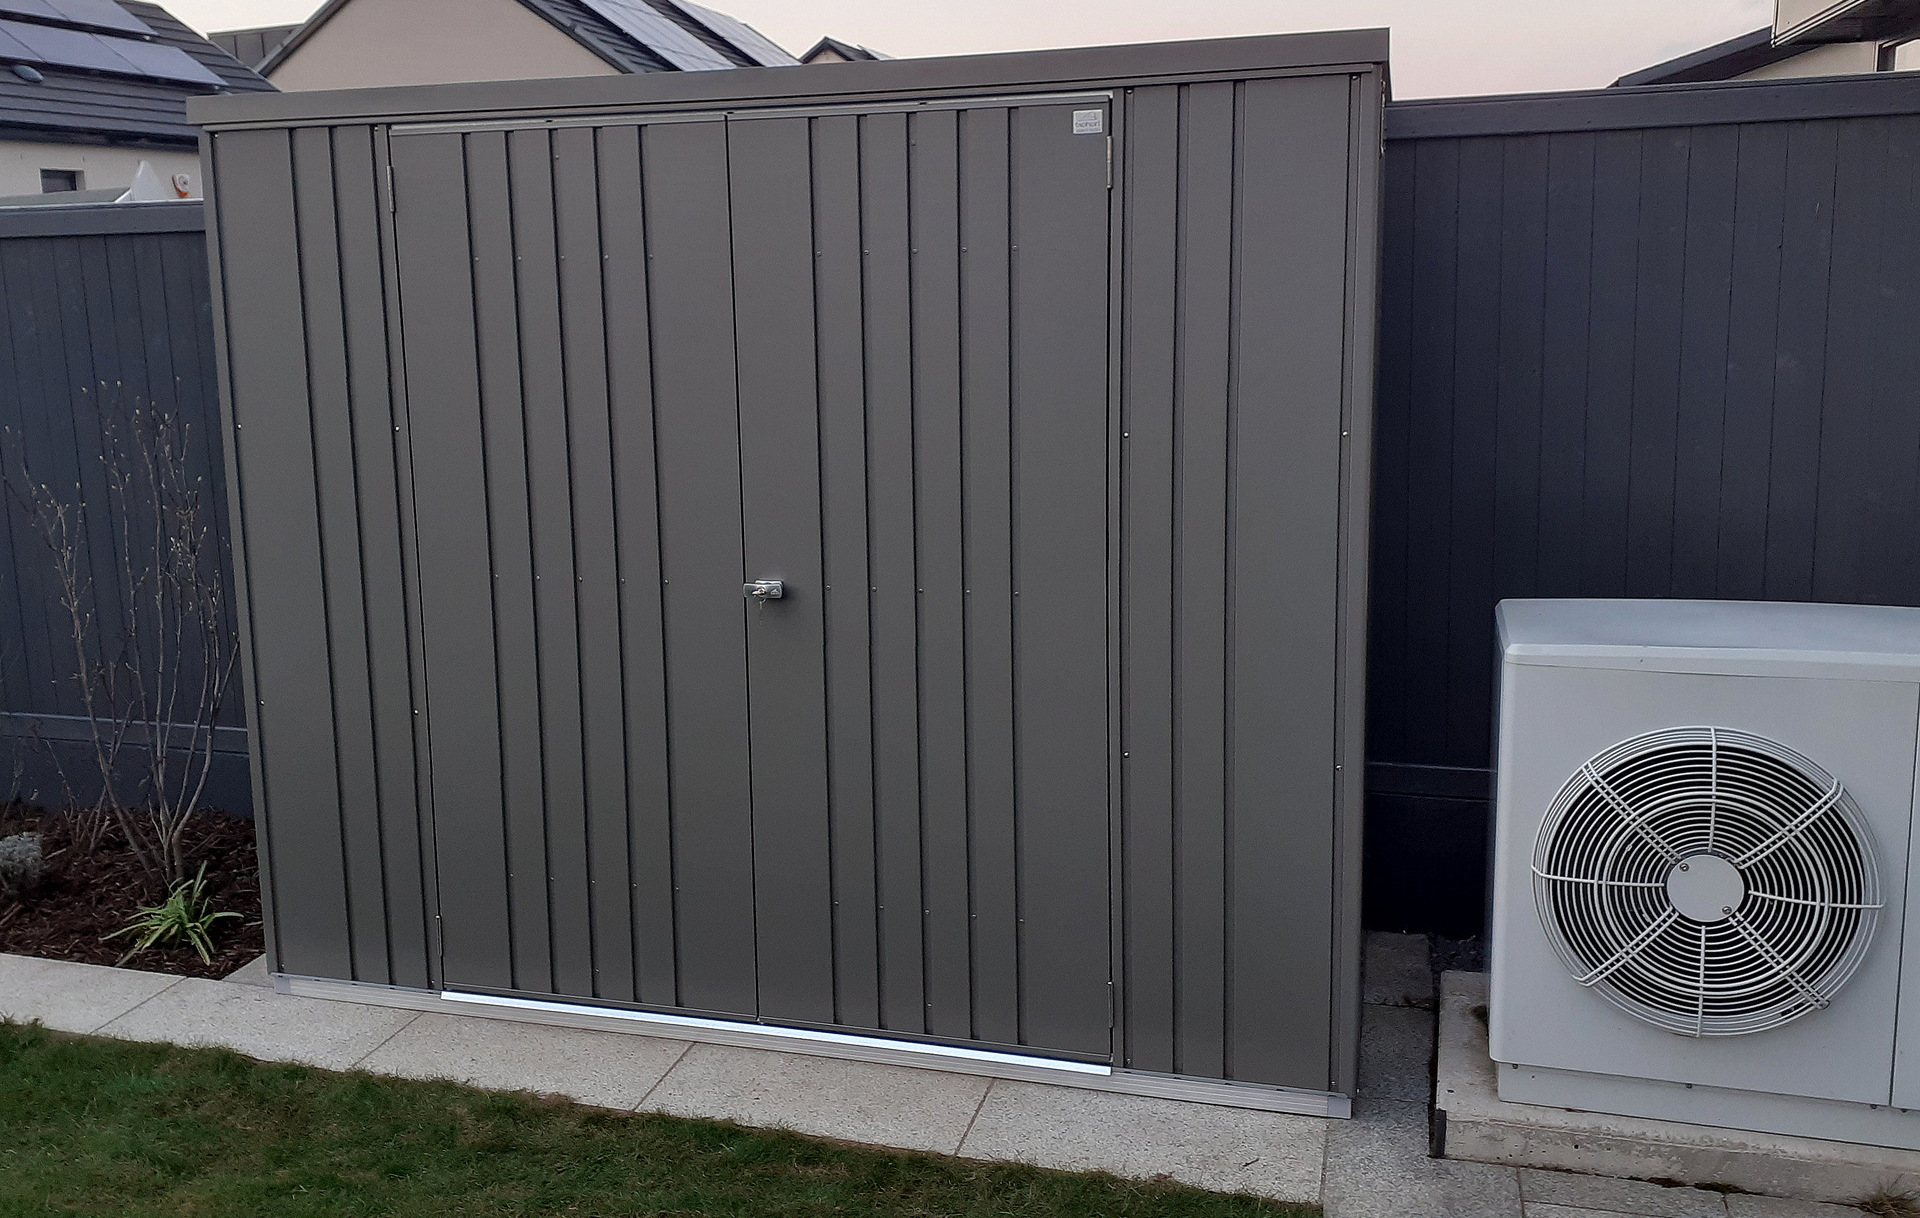 The superb quality and style of the Biohort Equipment Locker 230 in metallic quartz grey  | supplied + installed in Carrickmines, Dublin 18  by Owen Chubb Landscapers. Ireland's # 1 Biohort Dealer and Biohort Certified Installation Partner. Tel 087-2306 128.